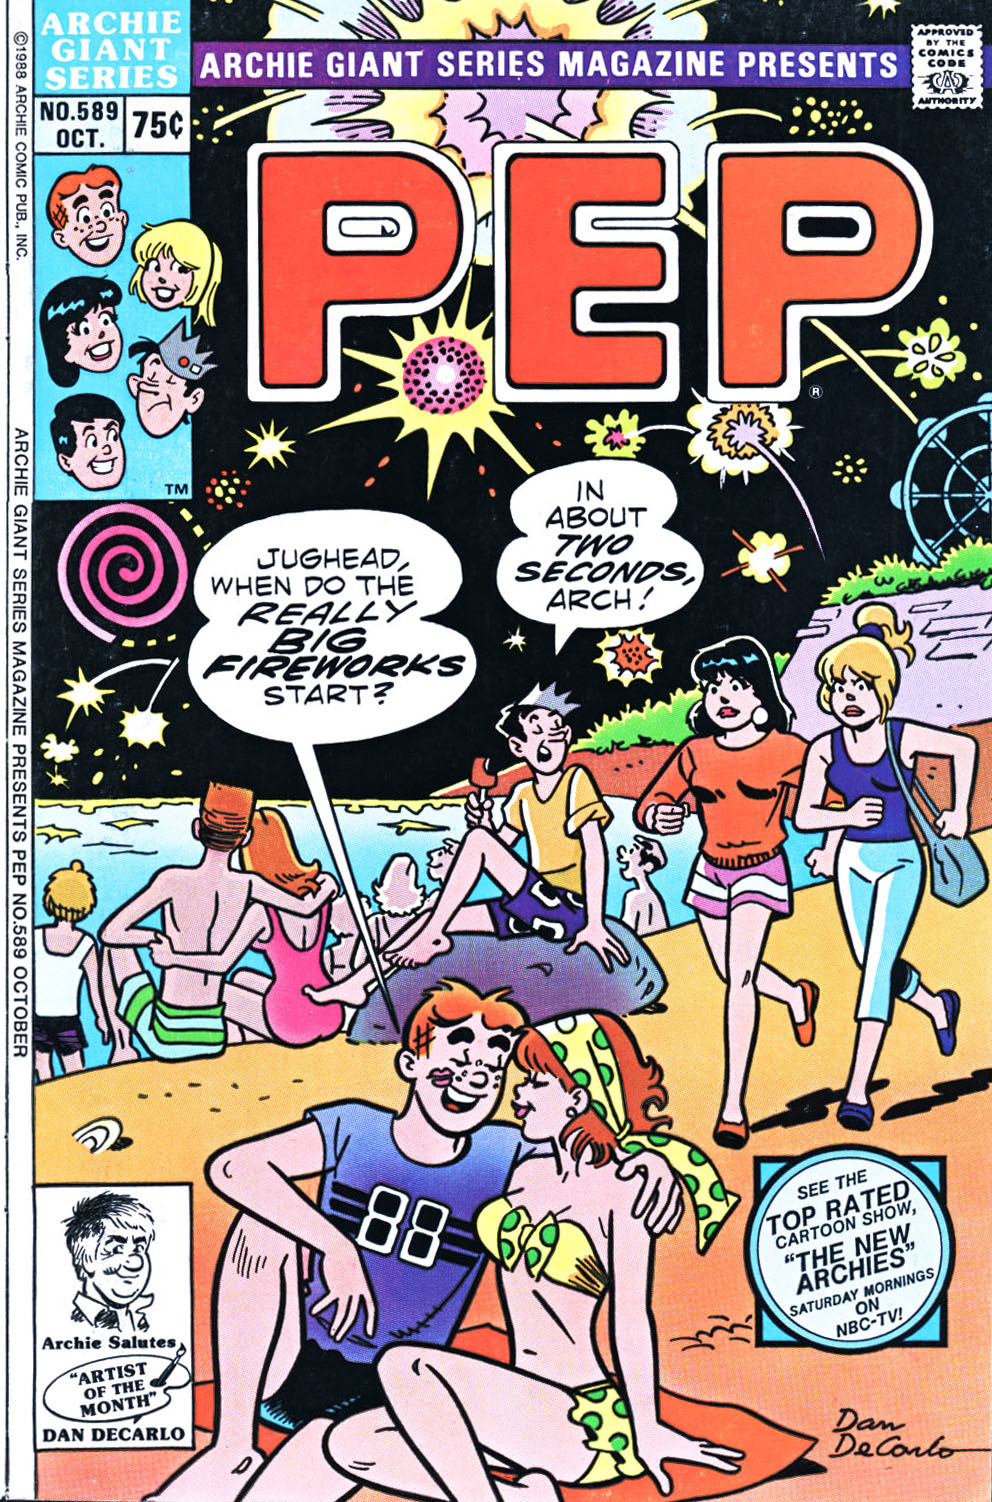 Archie Giant Series Magazine 589 Page 1